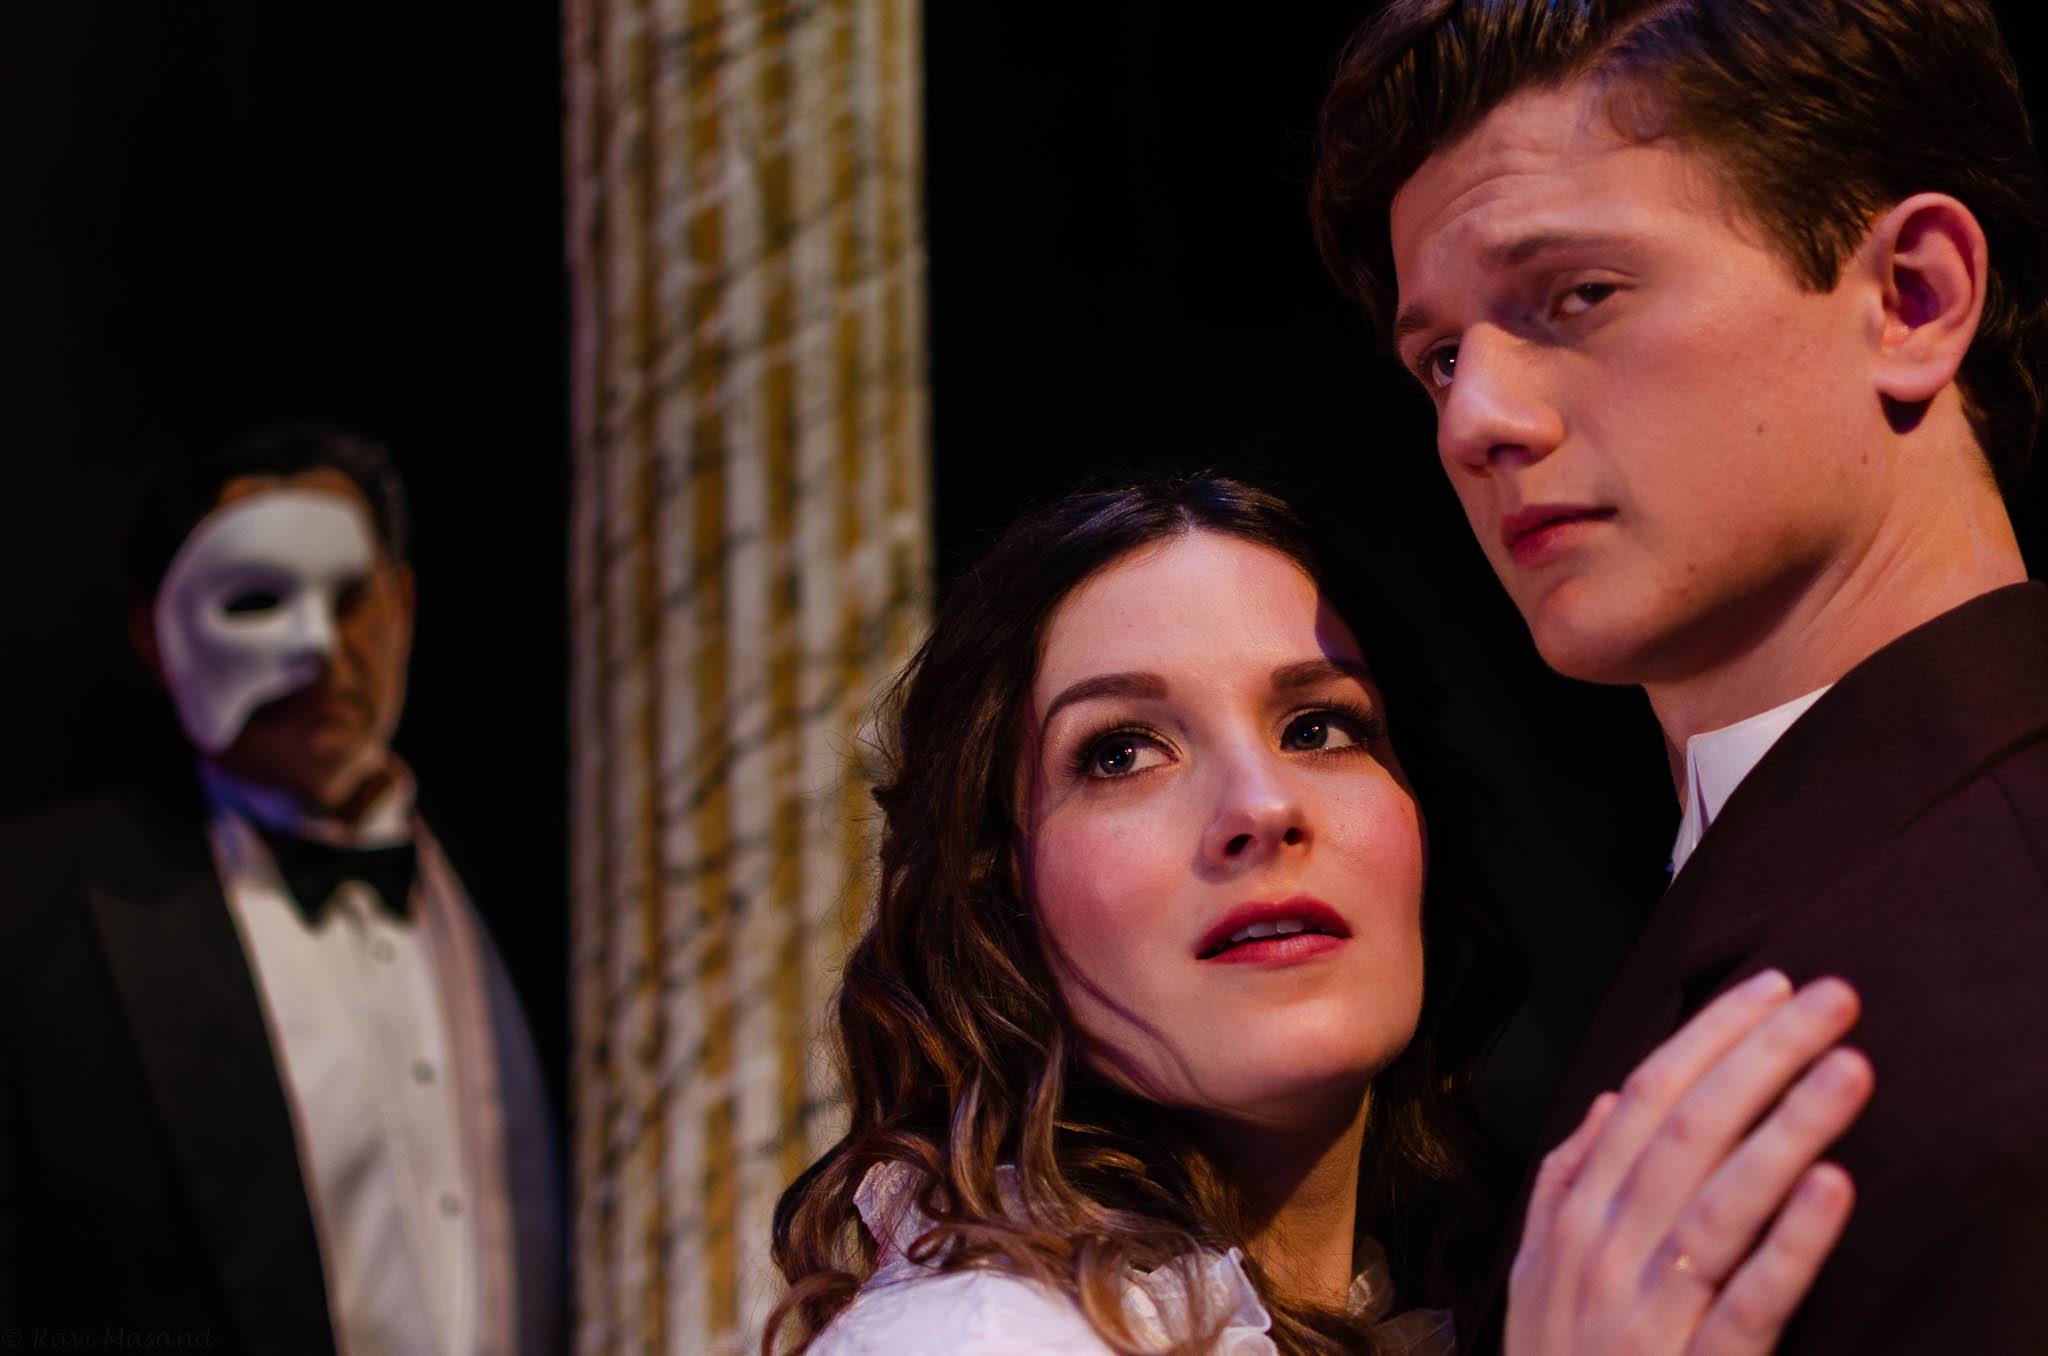  Pedro Rodelas, Rebecca Davis and Taylor Hendricks in Ohlone College and Stage 1’s co-production of The Phantom of the Opera 